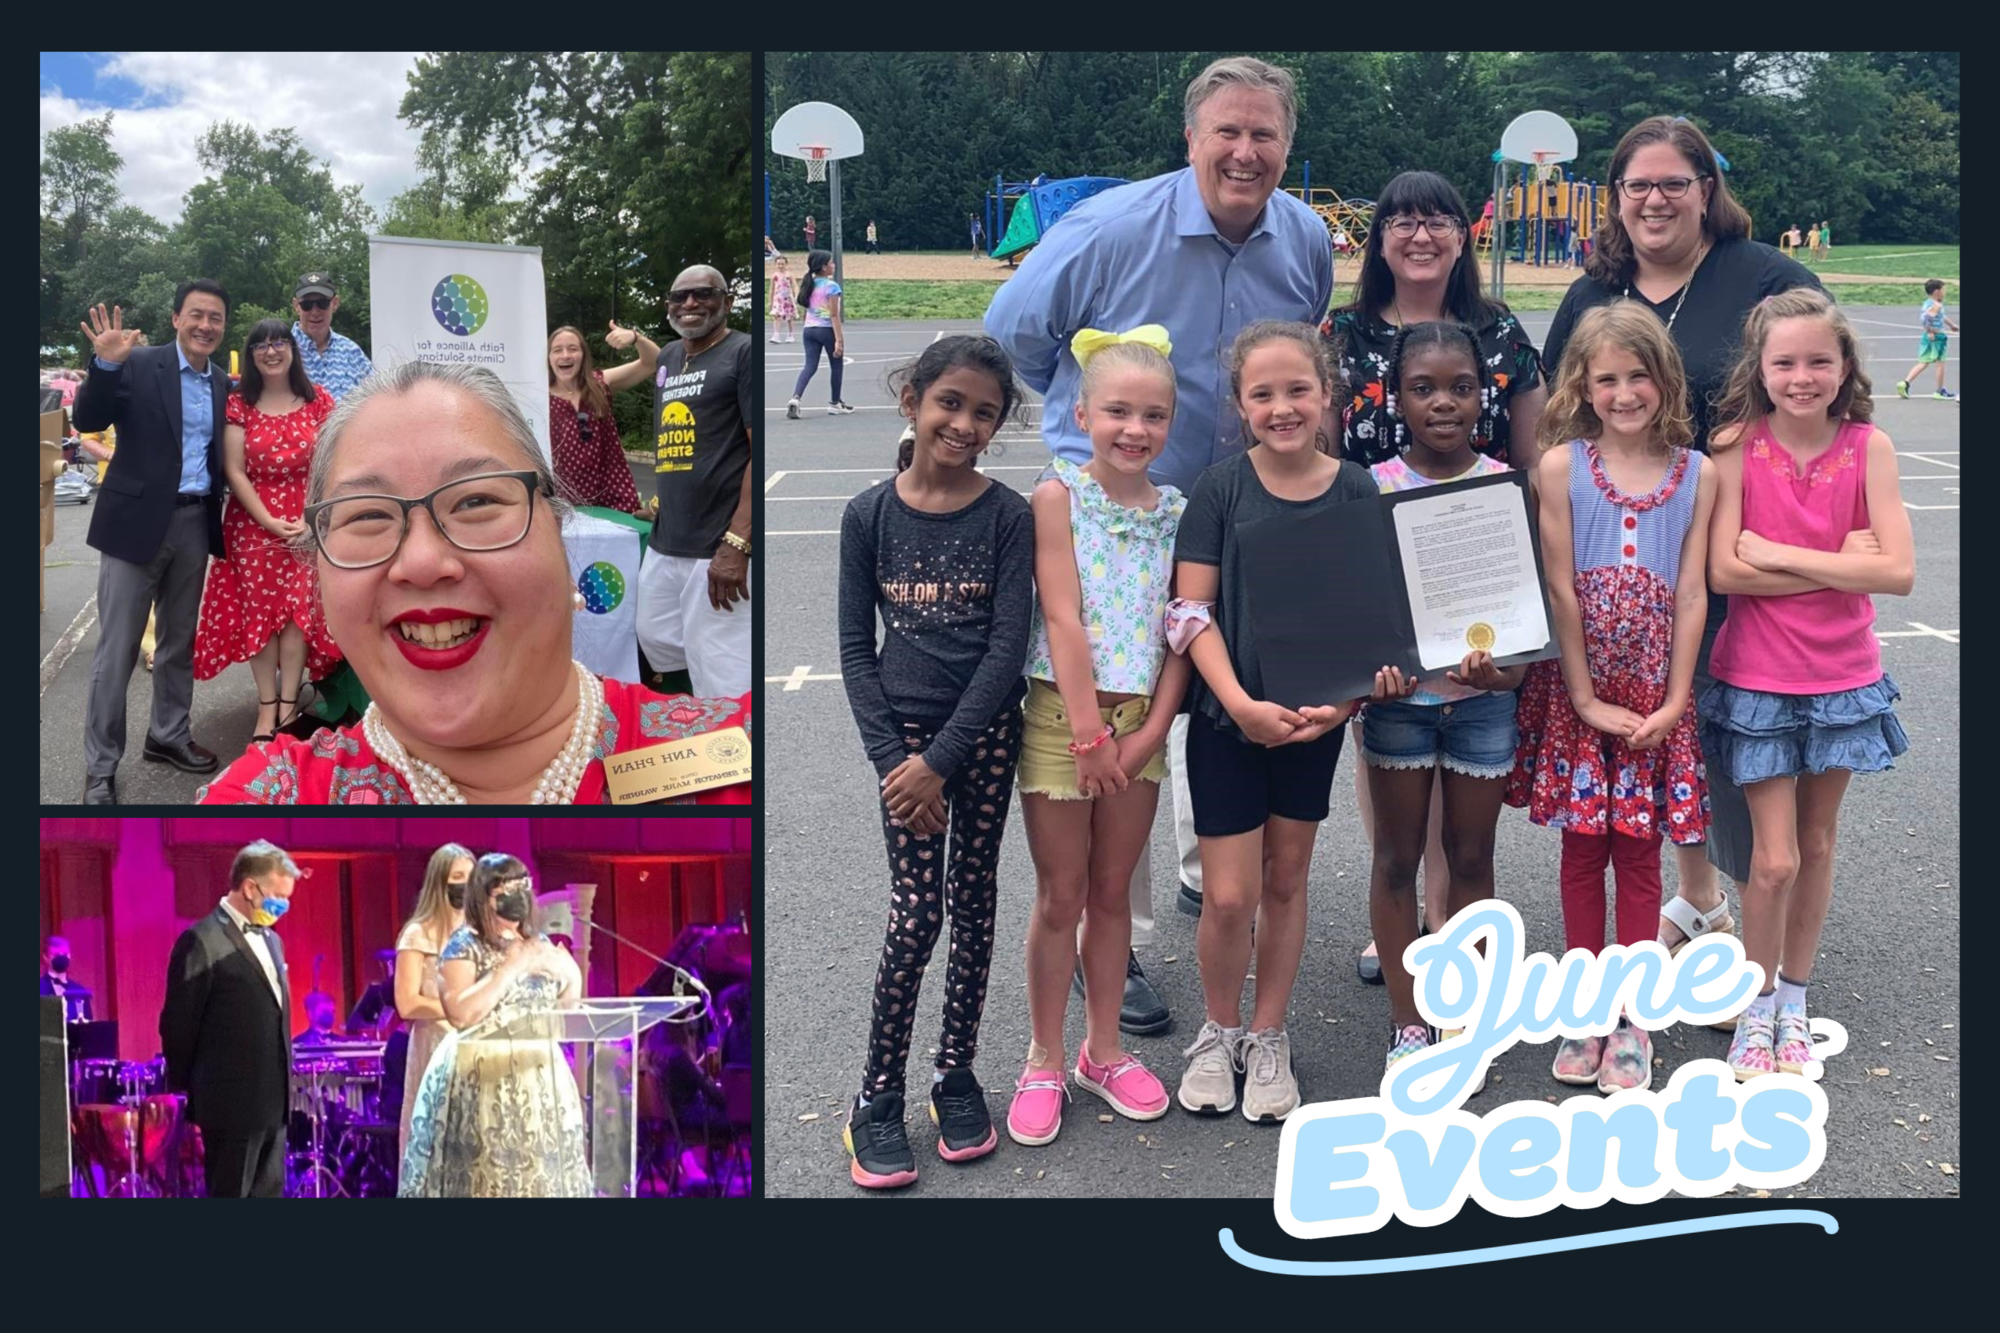 Photo collage of Laura Jane Cohen at Greenbriar West Elementary School, the Cappies Awards, and a Juneteenth celebration